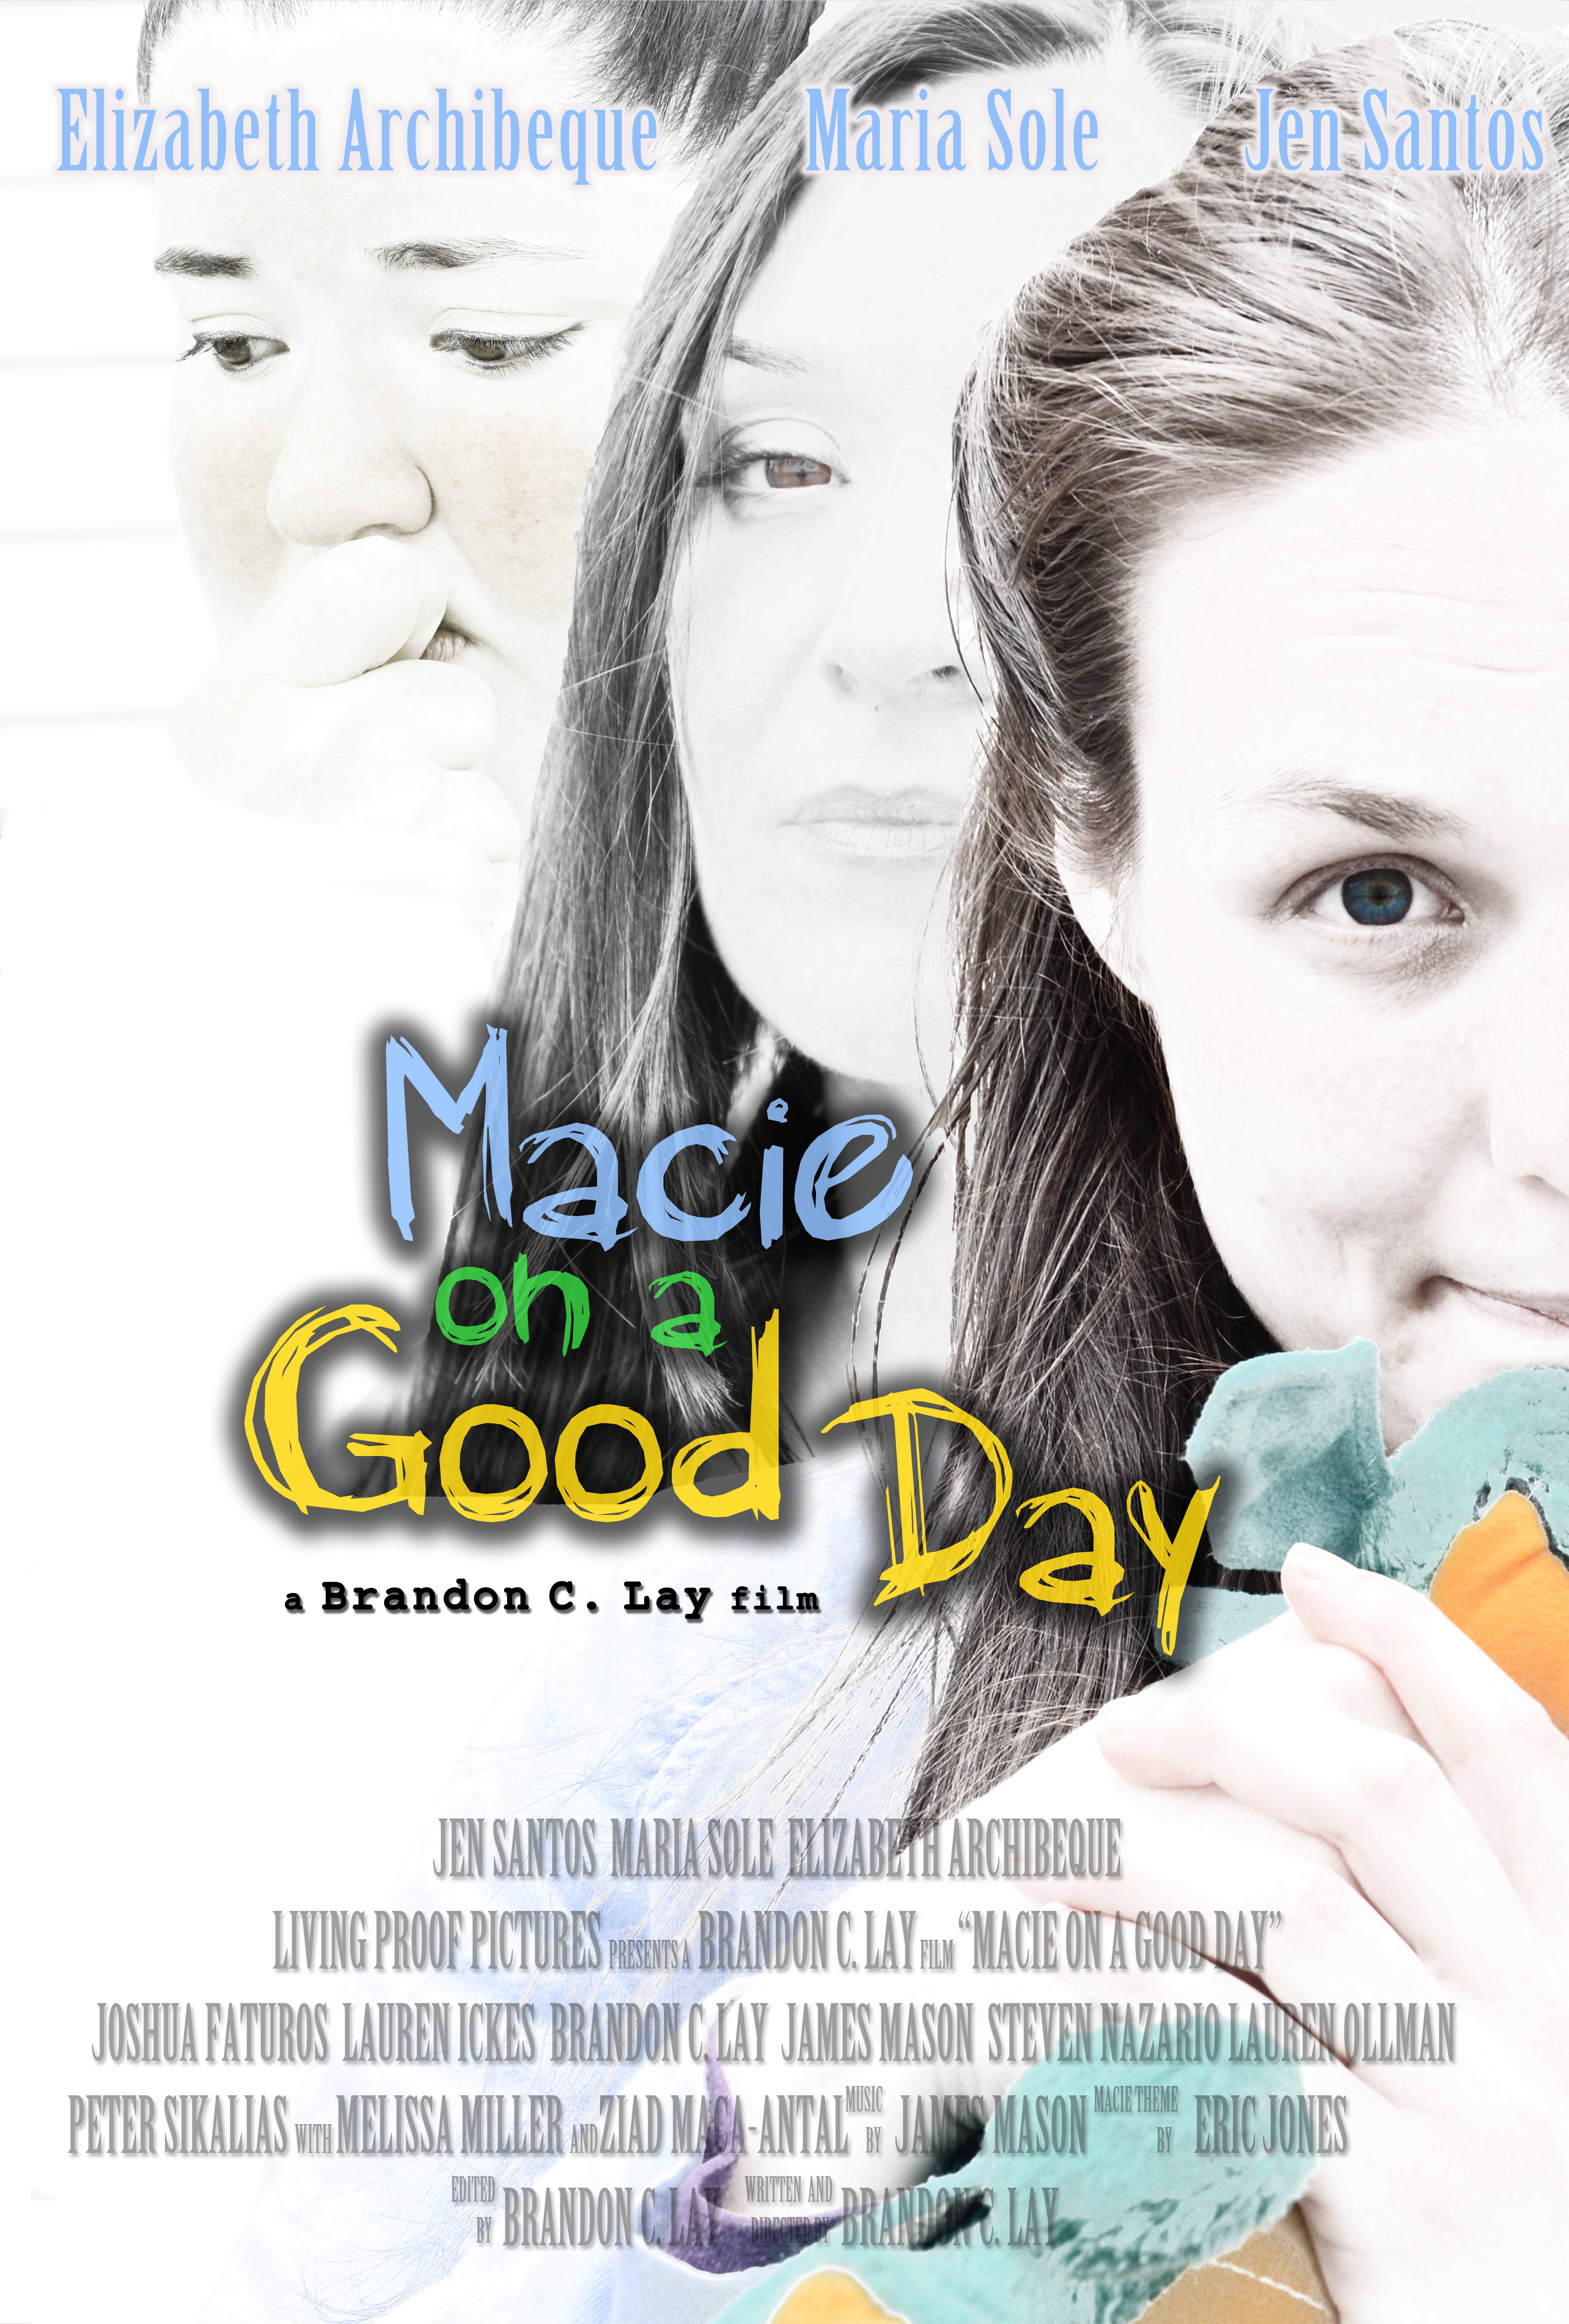 Jen Santos, Maria Sole and Elizabeth Archibeque in Macie on a Good Day (2014)